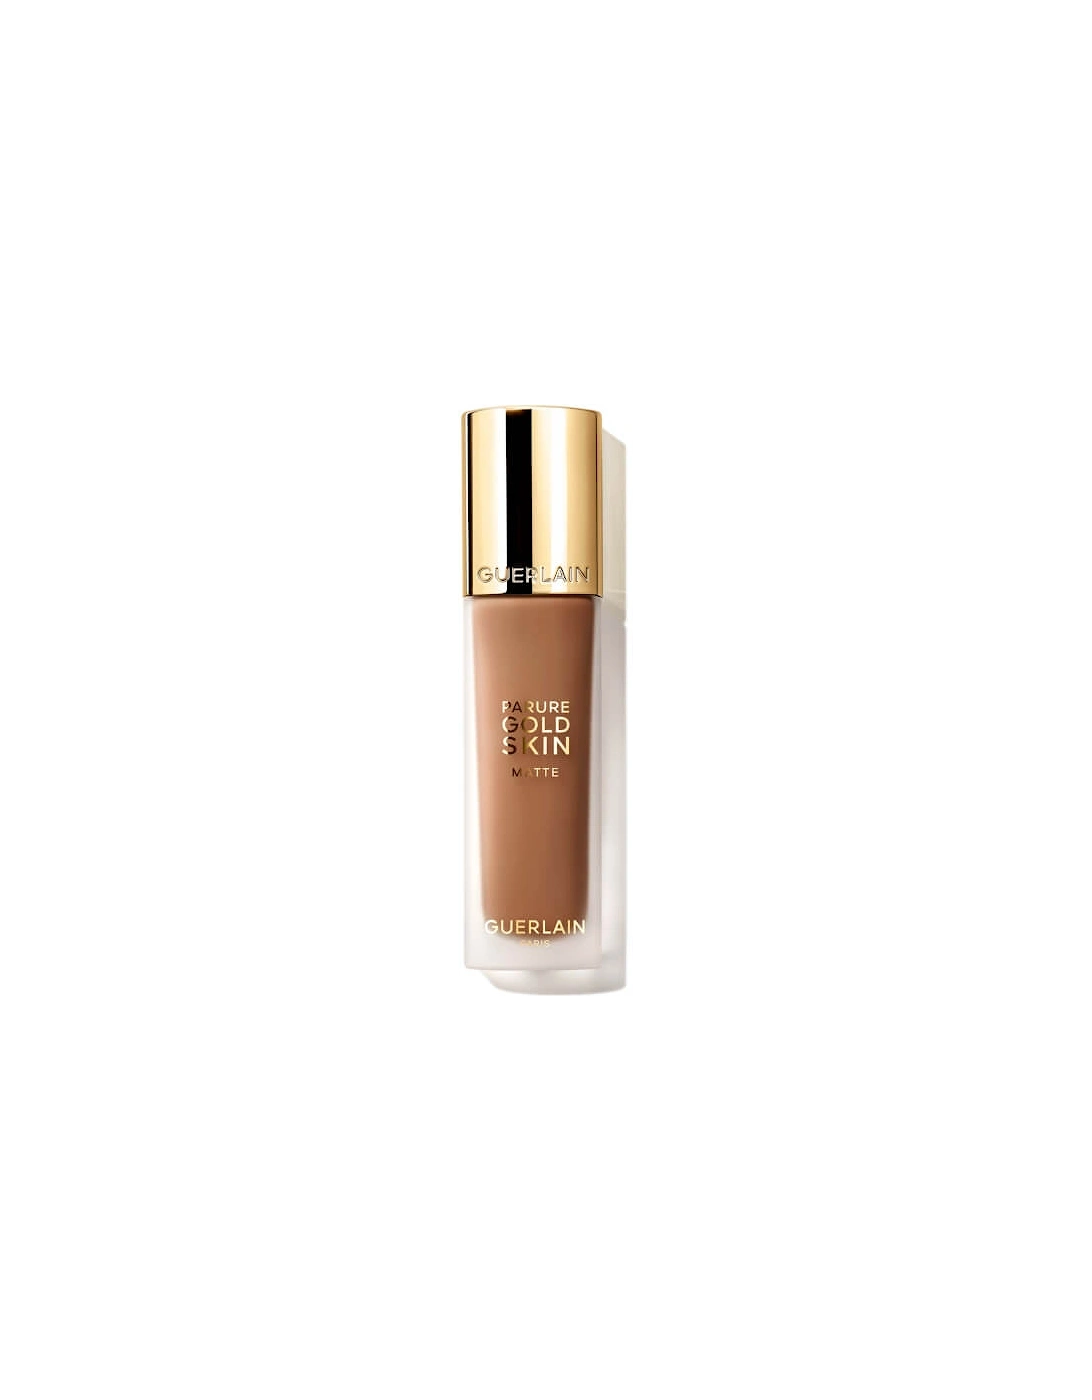 Parure Gold Skin 24H No-Transfer High Perfection Foundation - 6N Neutral / Neutre, 2 of 1